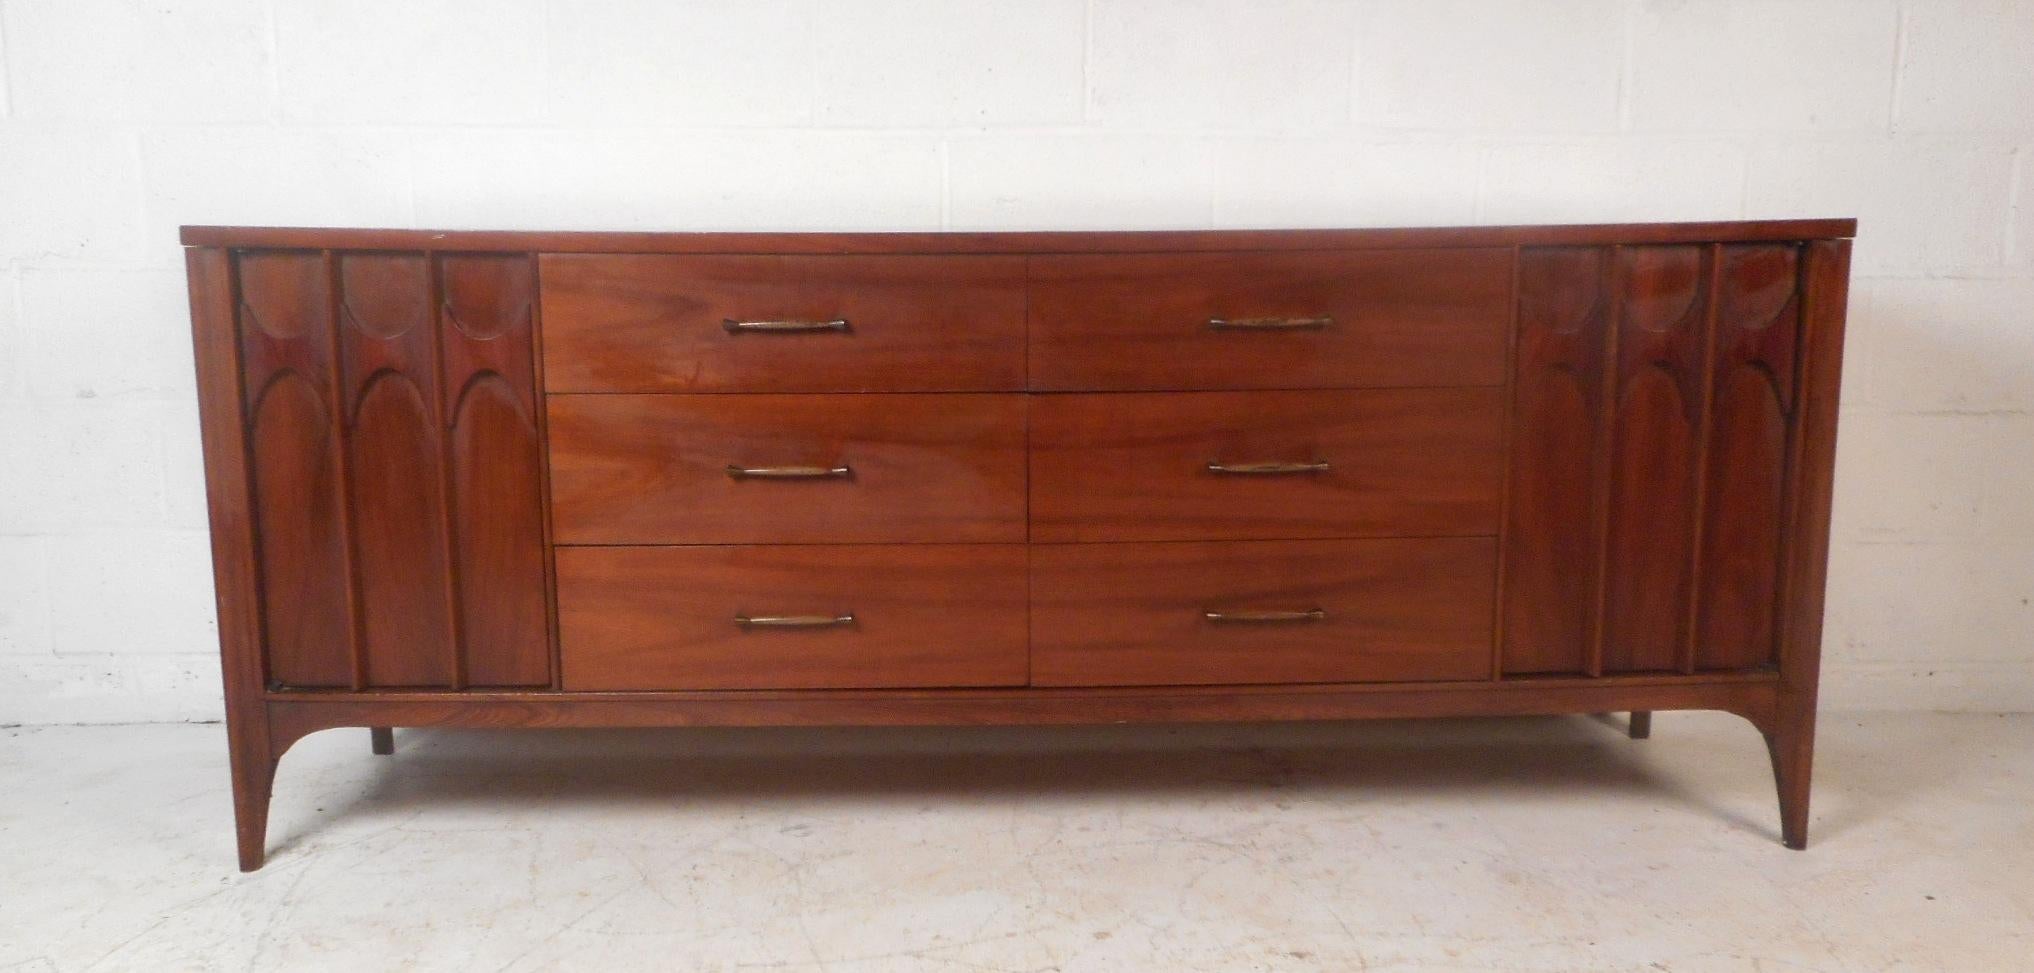 A gorgeous Mid-Century Modern walnut credenza with sculpted rosewood fixtures on the cabinet fronts. This stylish credenza features six large drawers in the centre and six drawers hidden behind cabinet doors on each side. A straight line design with